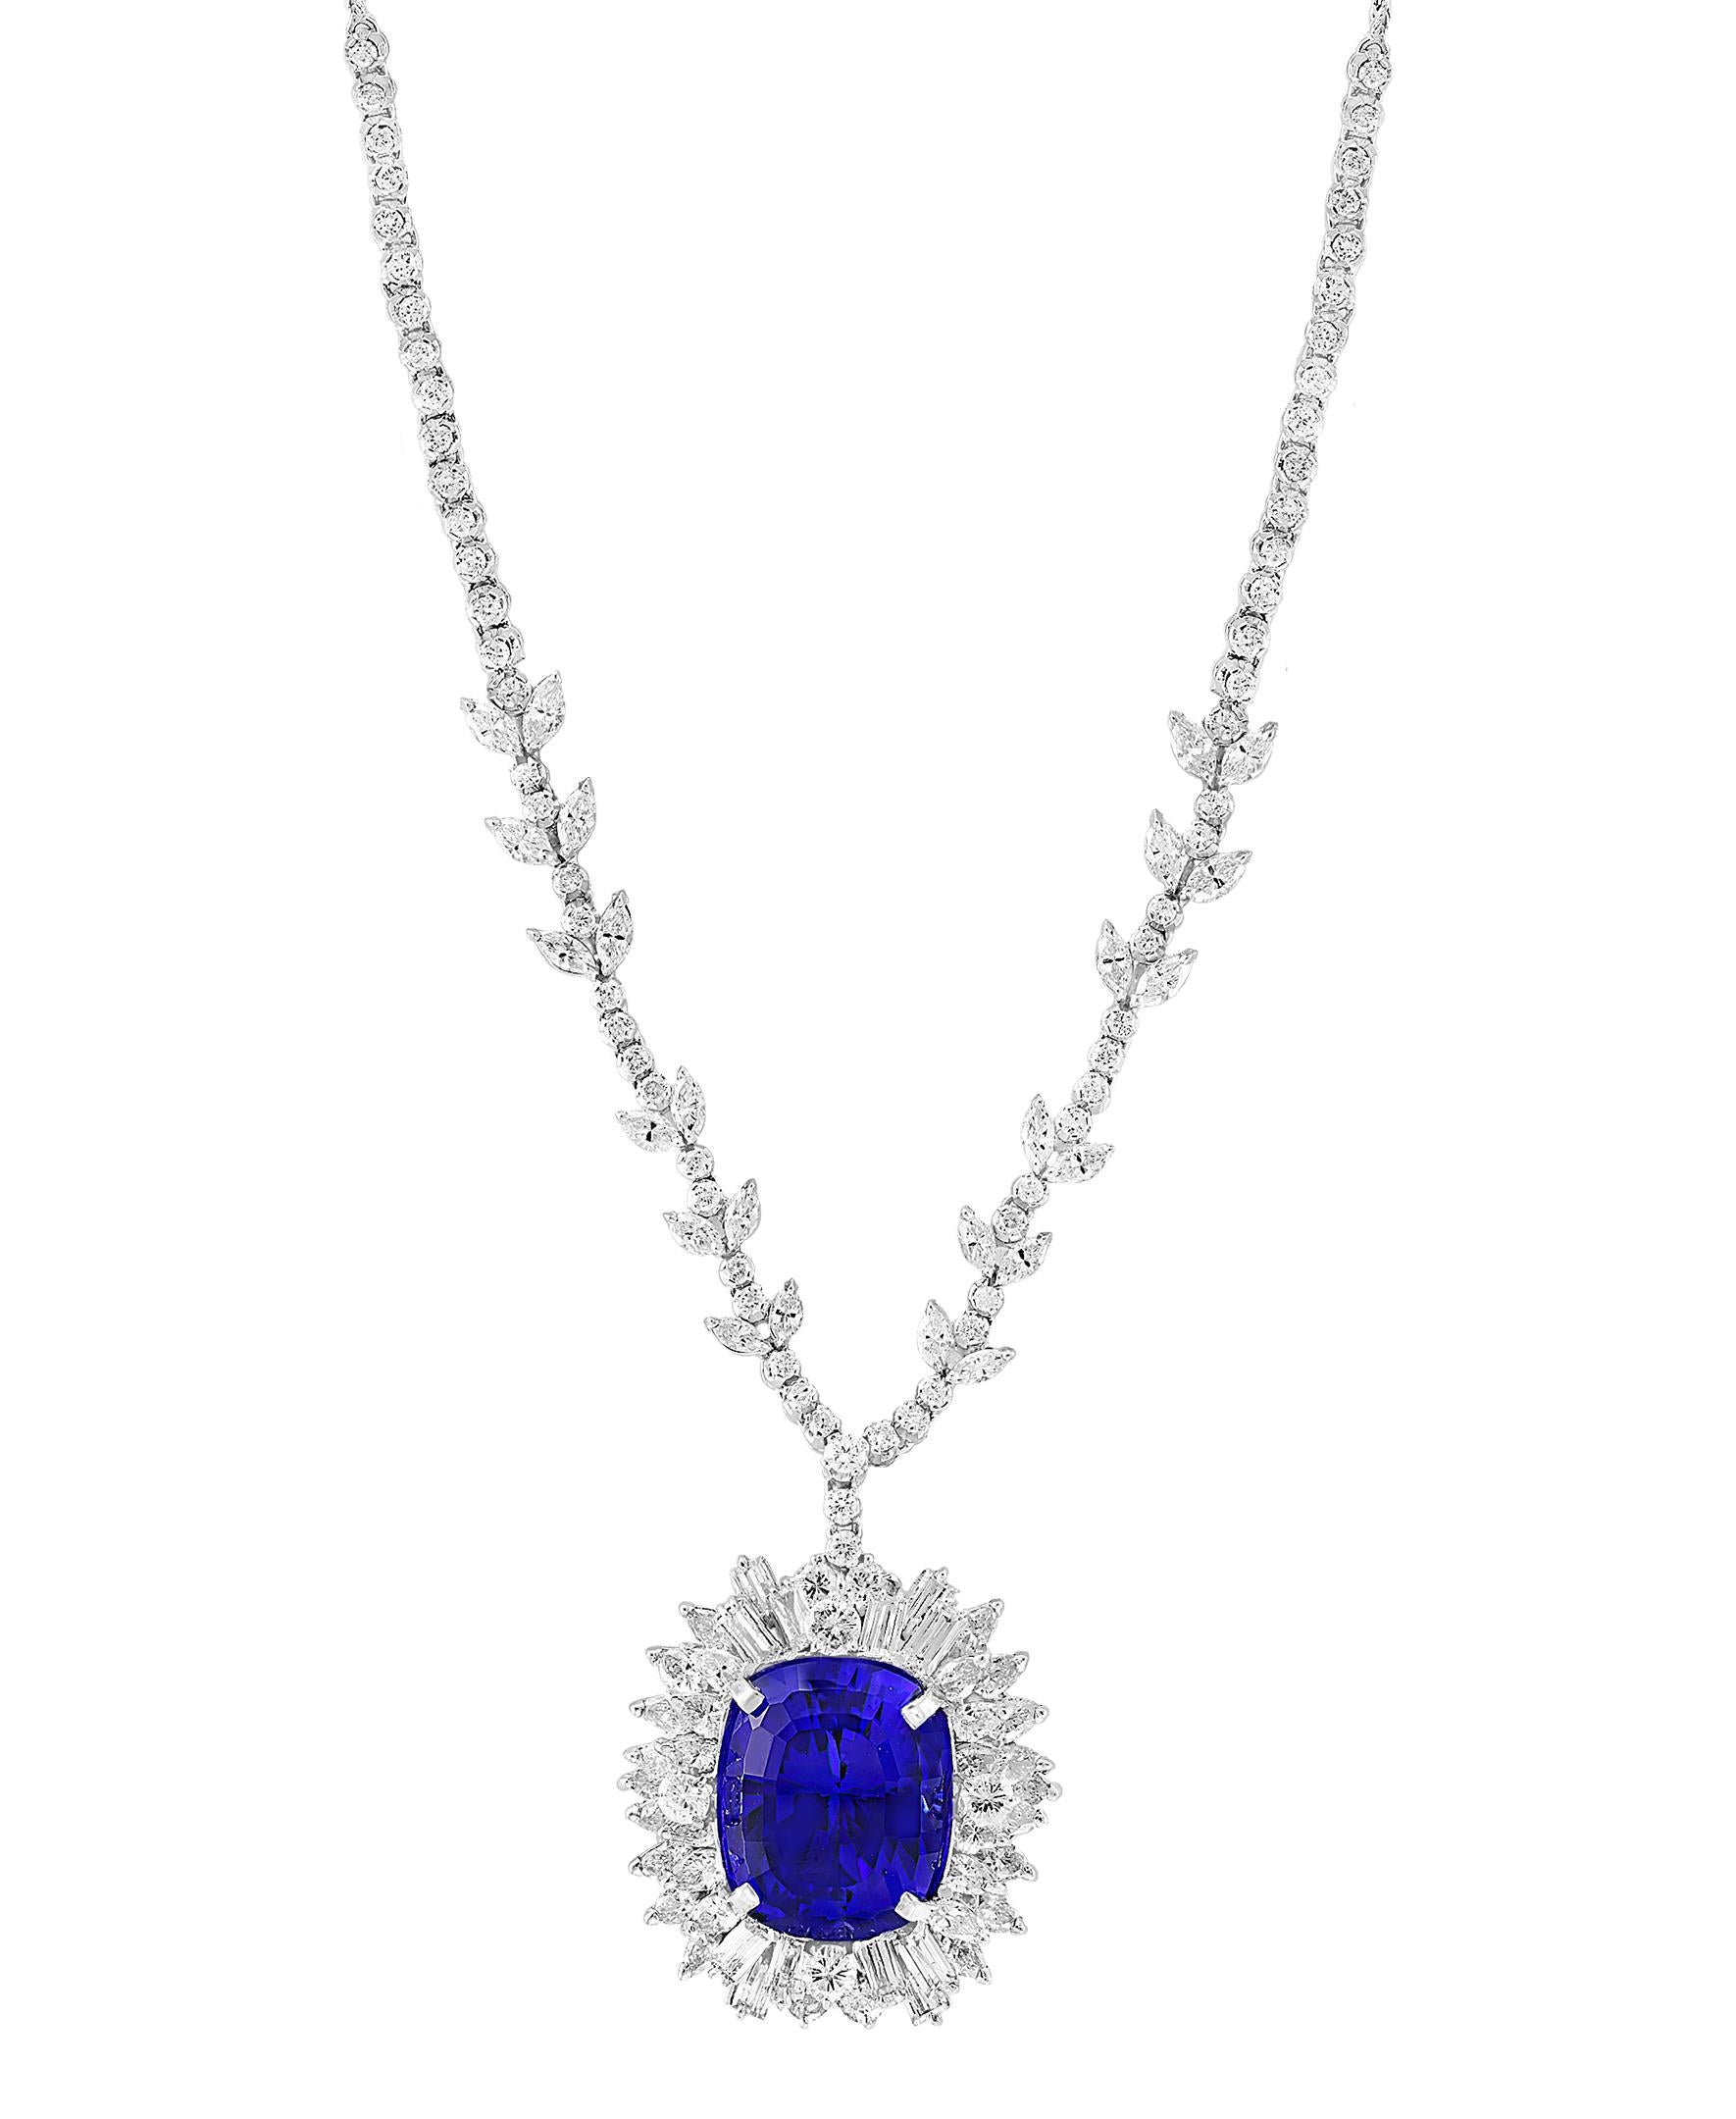 This extraordinary, 43 carat tanzanite is truly an extraordinary gemstone. There are  total  of 18 carats of shimmering white diamonds, this brilliant cushion-cut gem exhibits the rich violetish-blue color for which these stones are known and so